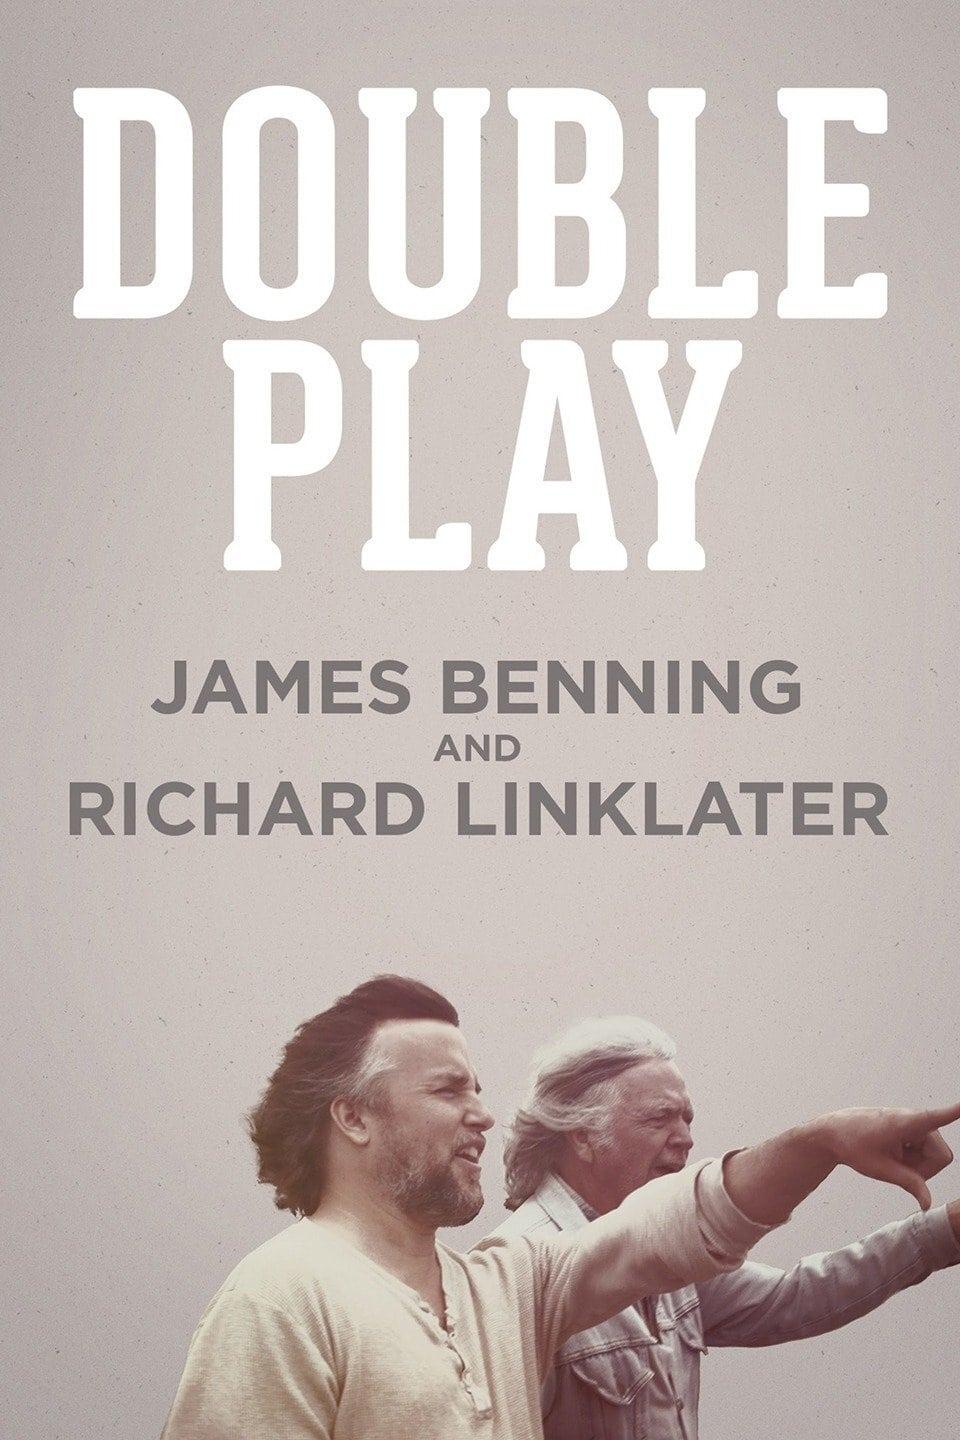 Double Play: James Benning and Richard Linklater poster